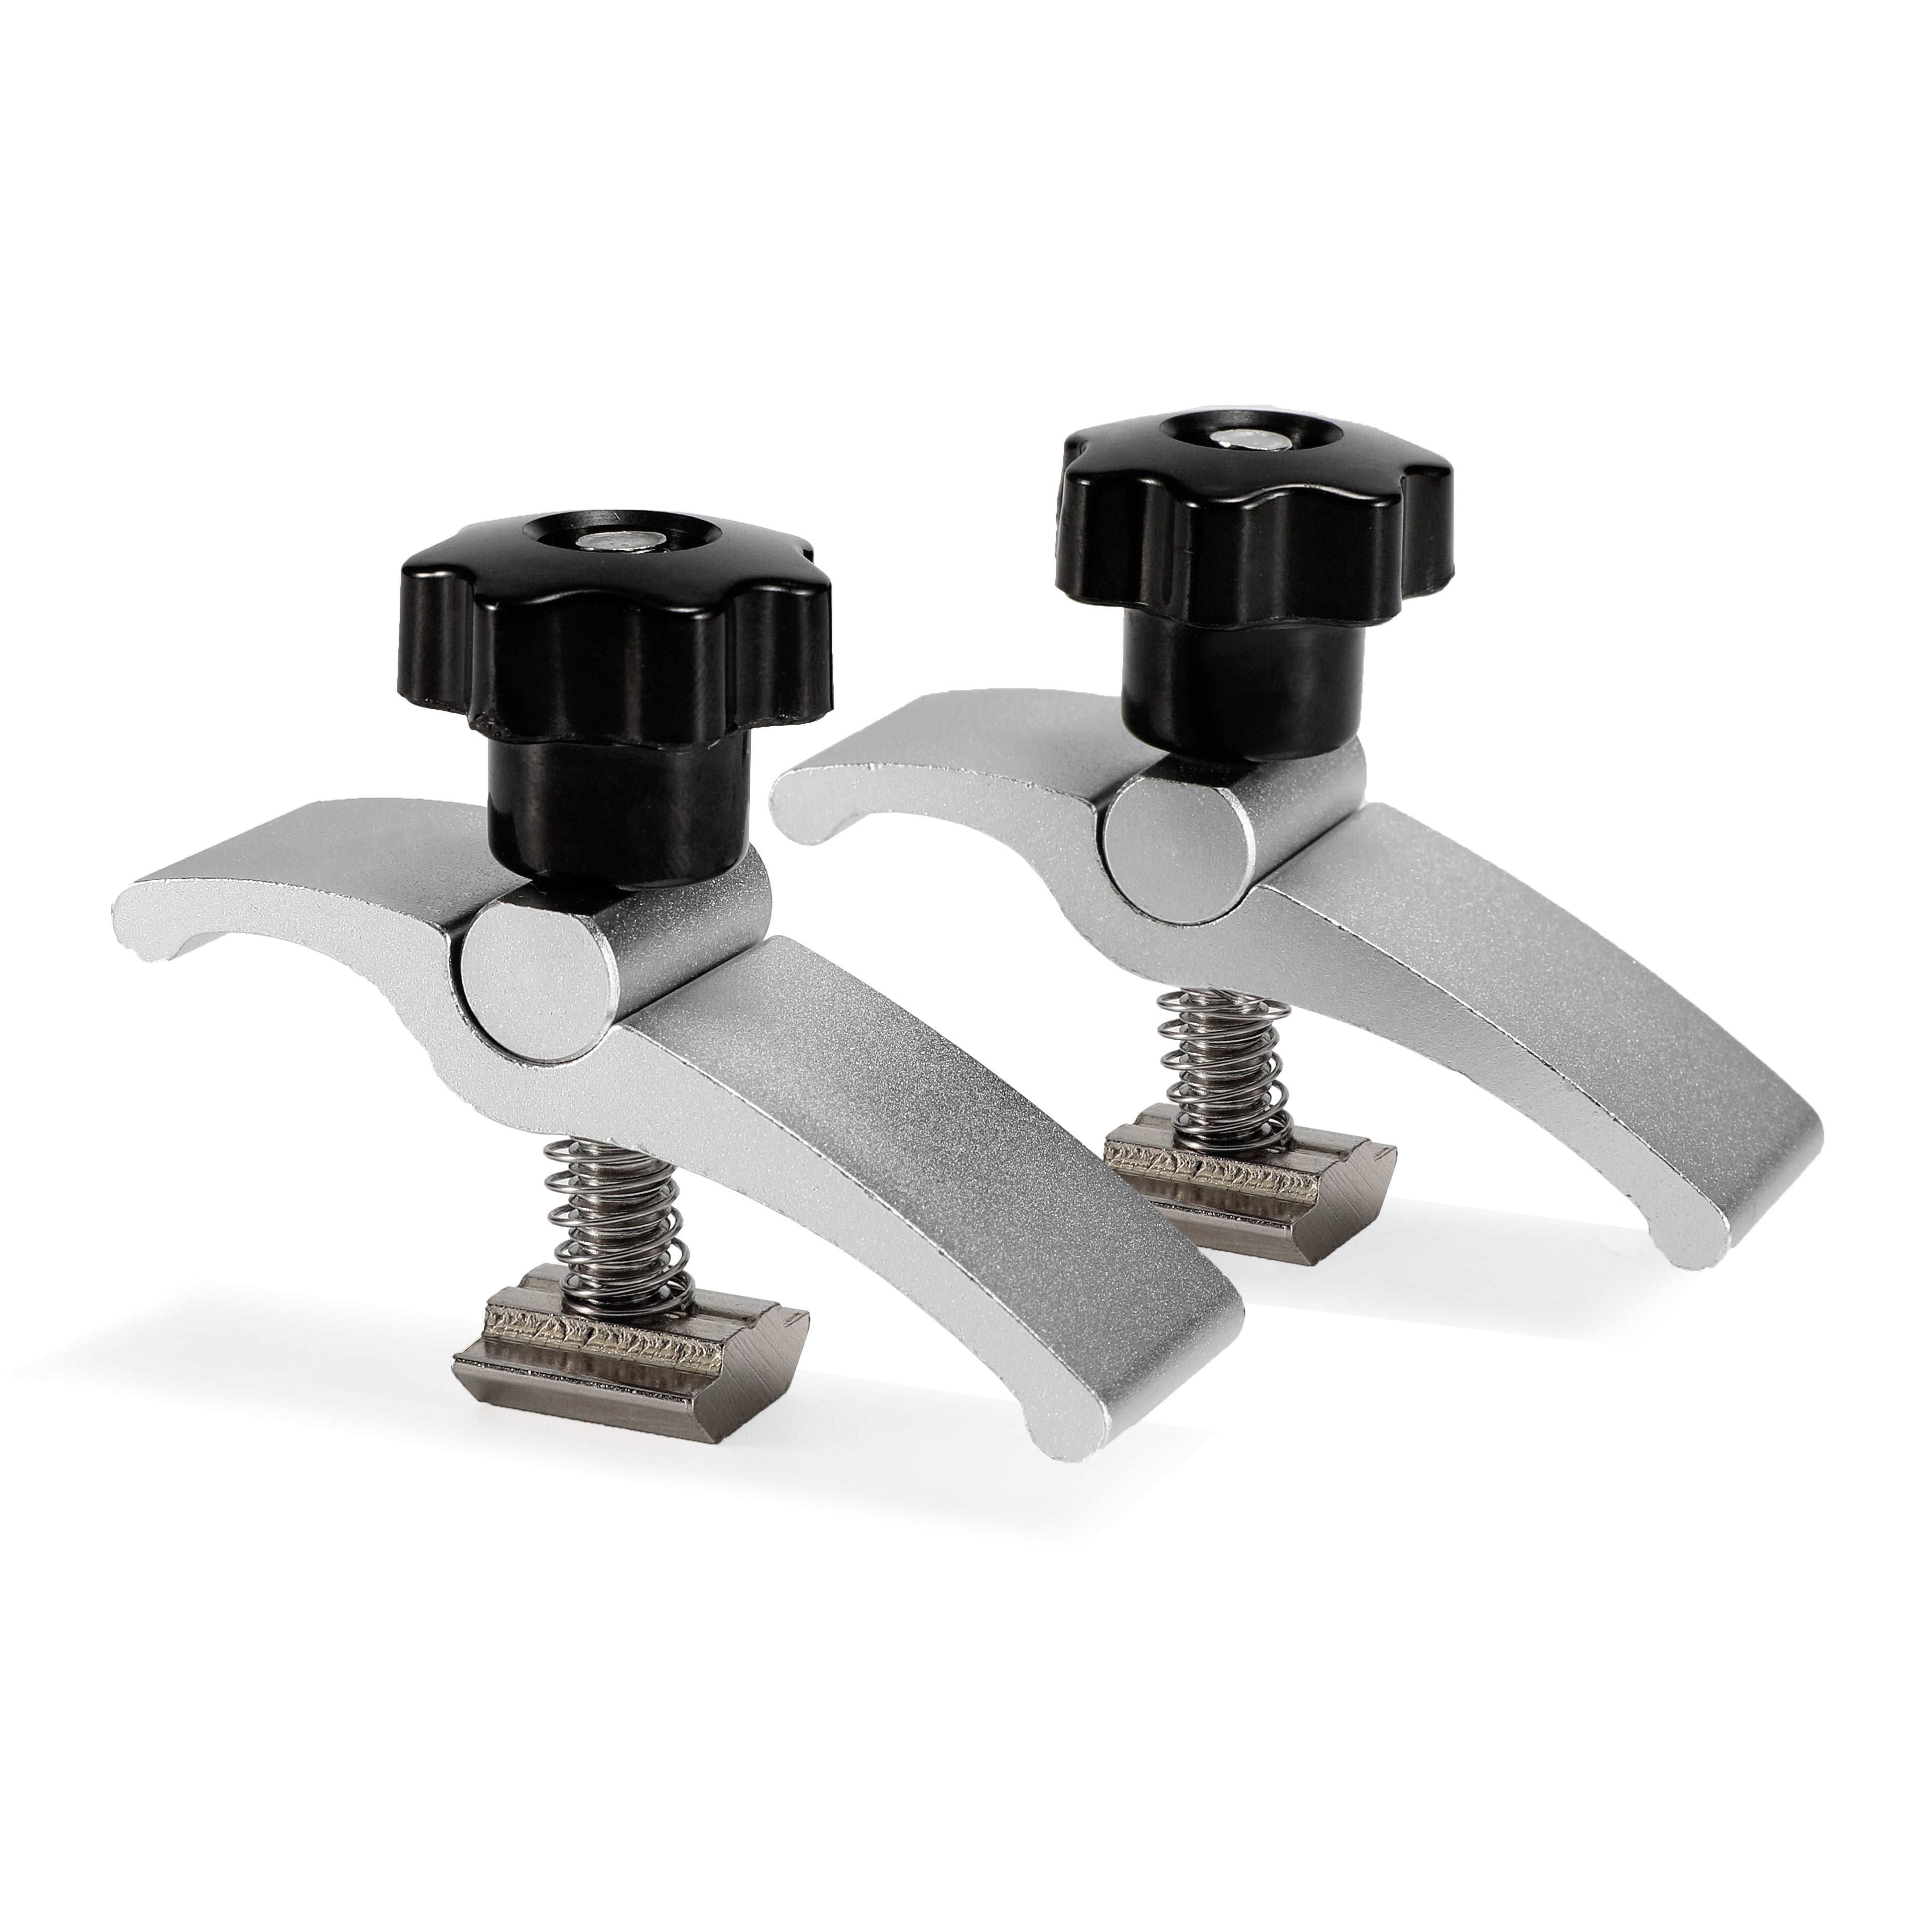 T-Slot Clamp, T-Track Clamp, Hold-Down Clamp with 8mm Threaded, Suitable  for Many Woodworking and Metalworking Applications for Work Holding,  Positioning, and Fixturing(Whole Set) 